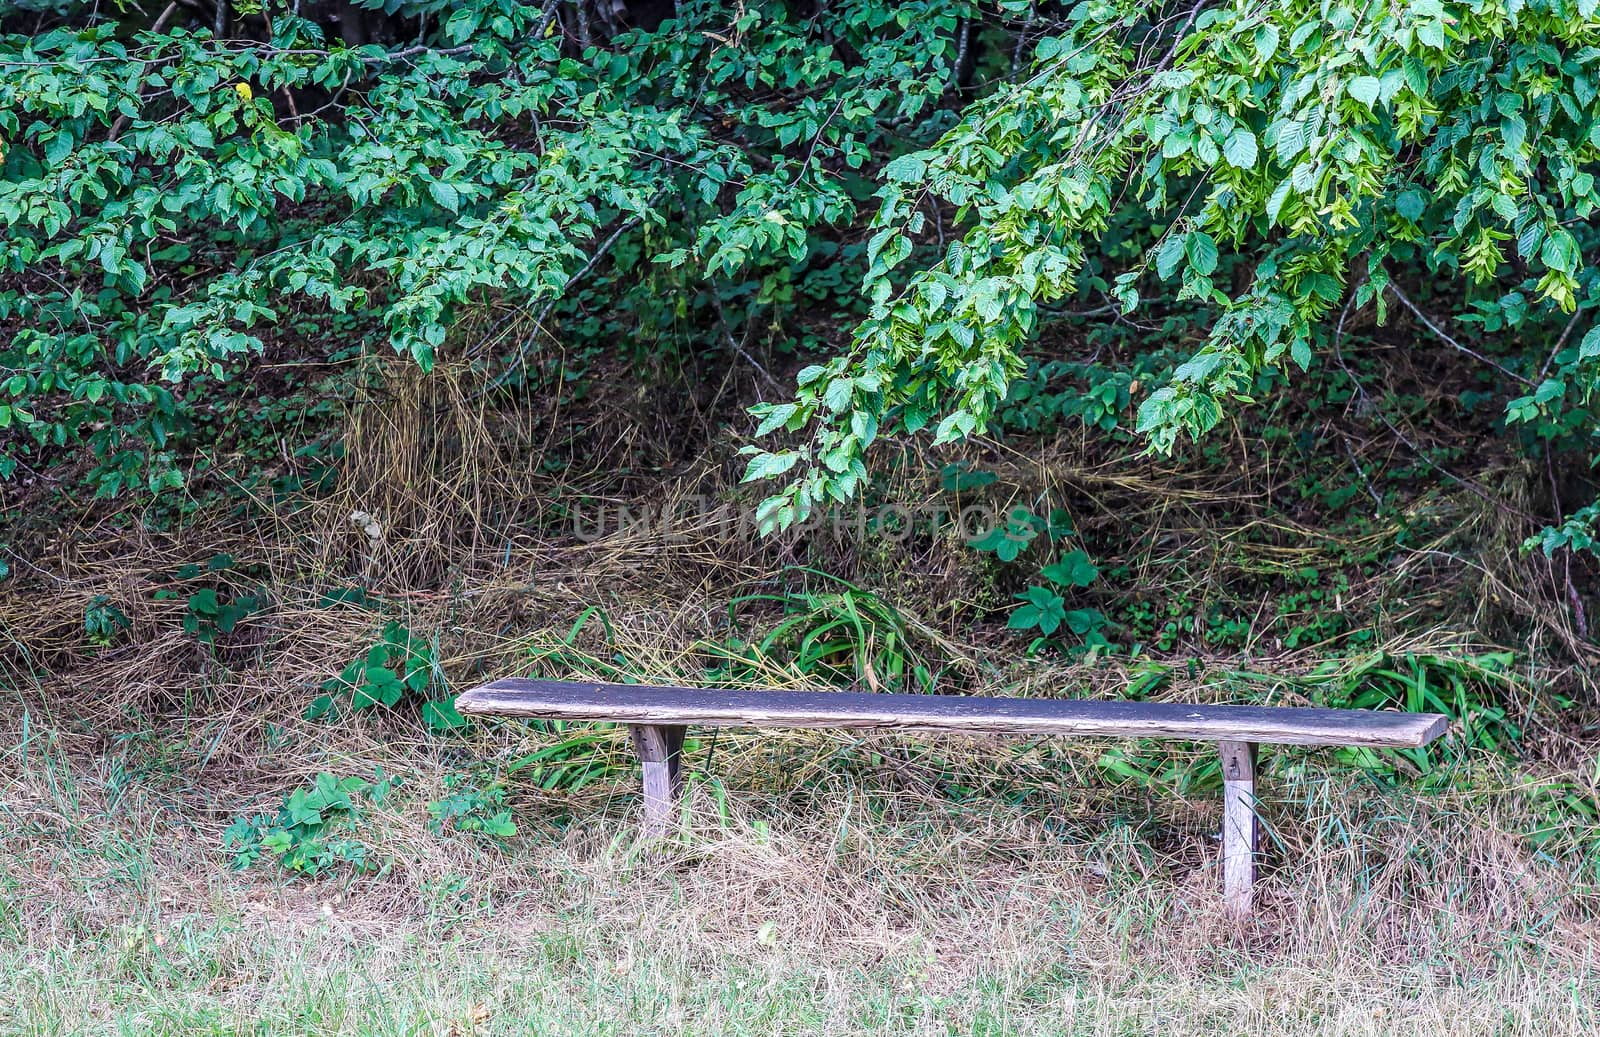 A public empty bench found in northern Europe.